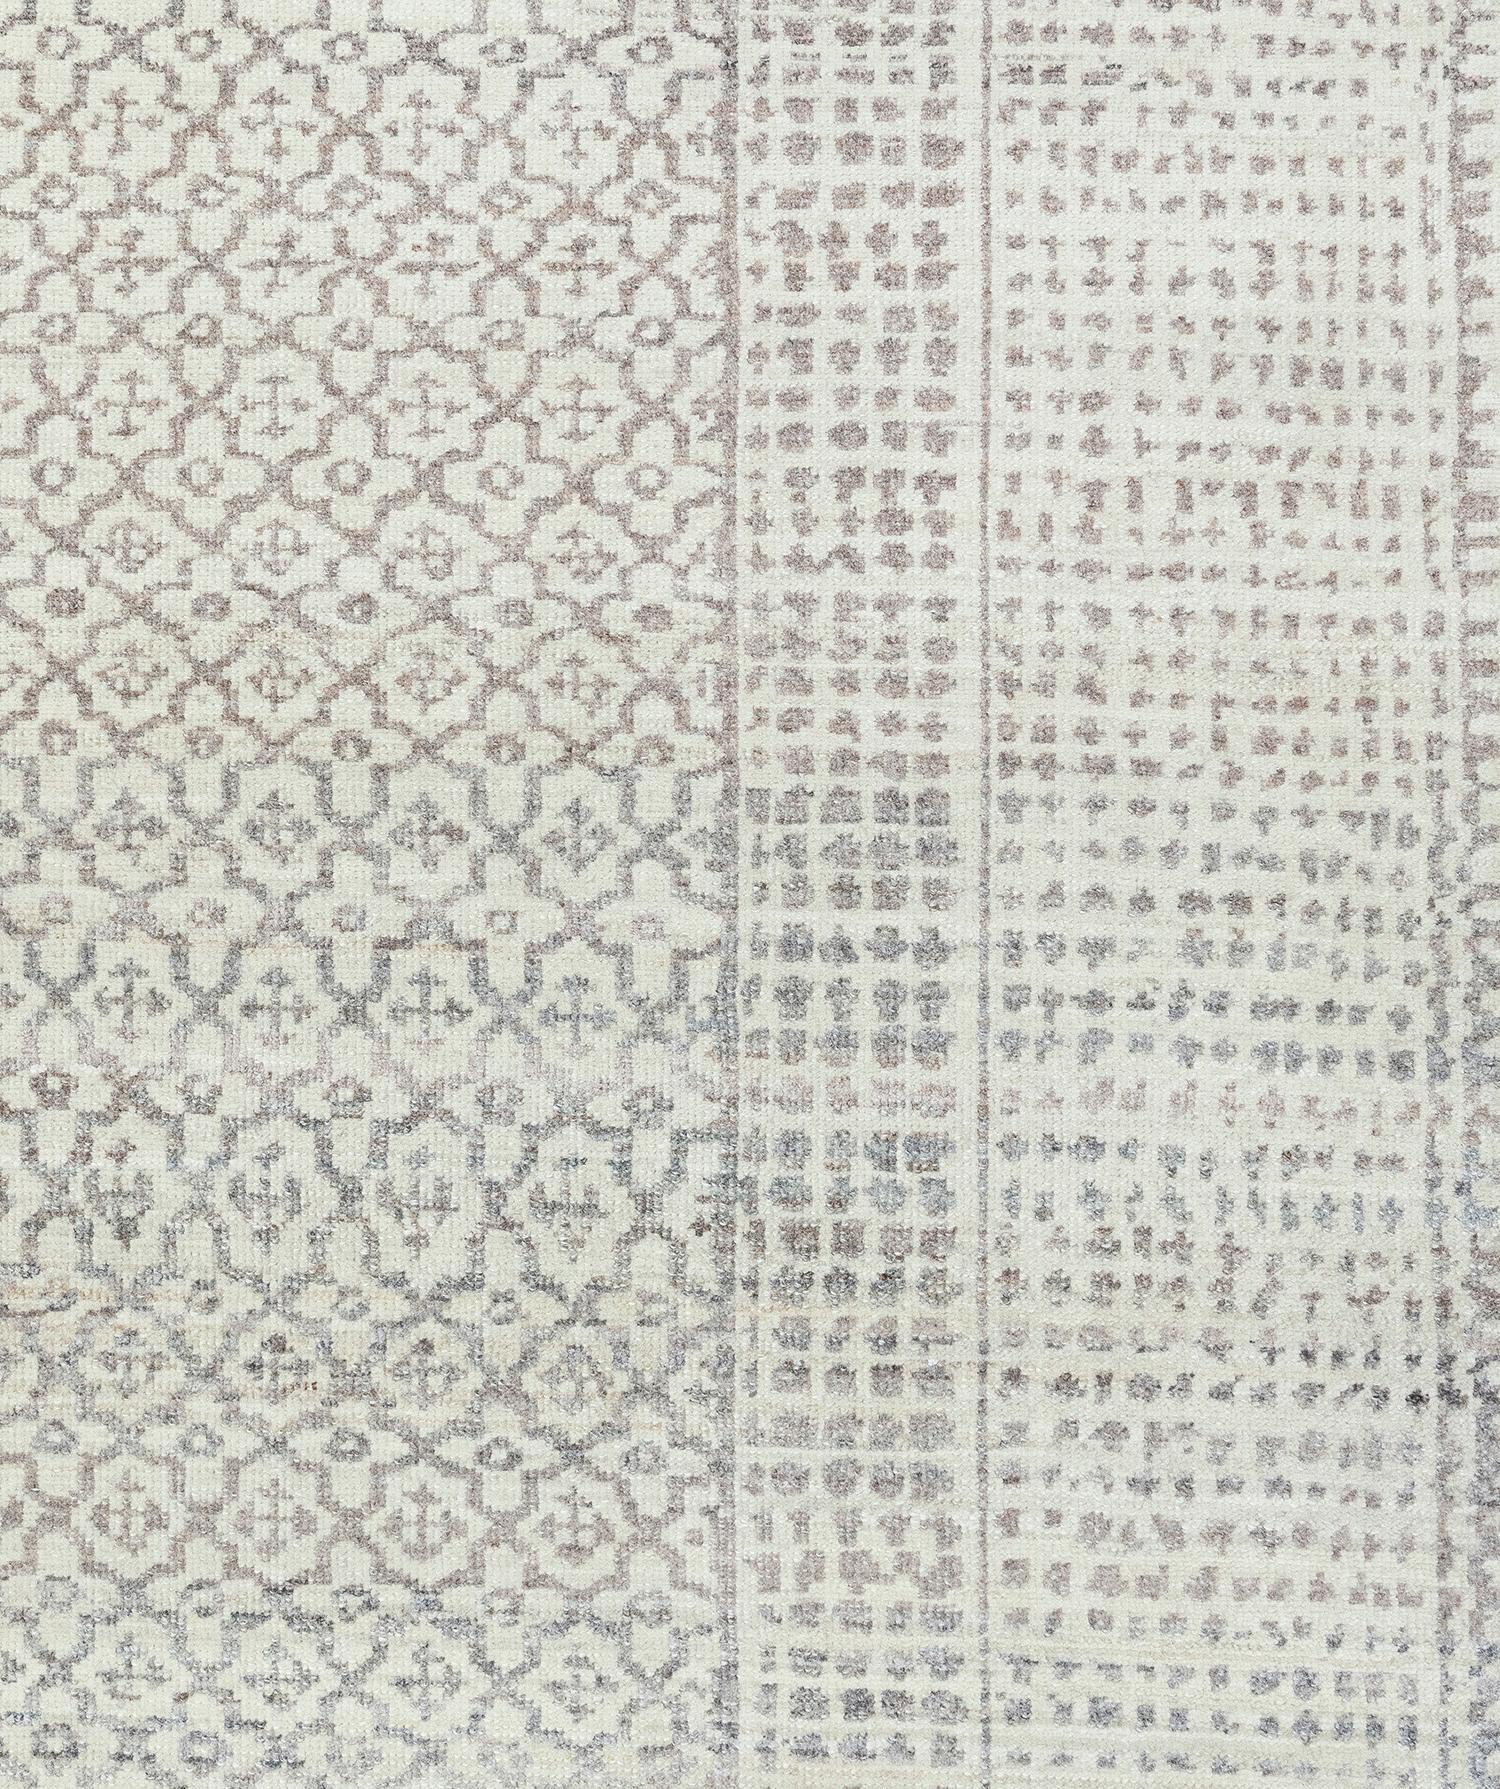 This rug resembles the rare and collectible antique Serab rugs that were produced in the 19th century and earlier.  Due to their limited availability, NASIRI revived the ancient dyeing and weaving techniques that had dissolved over the years to